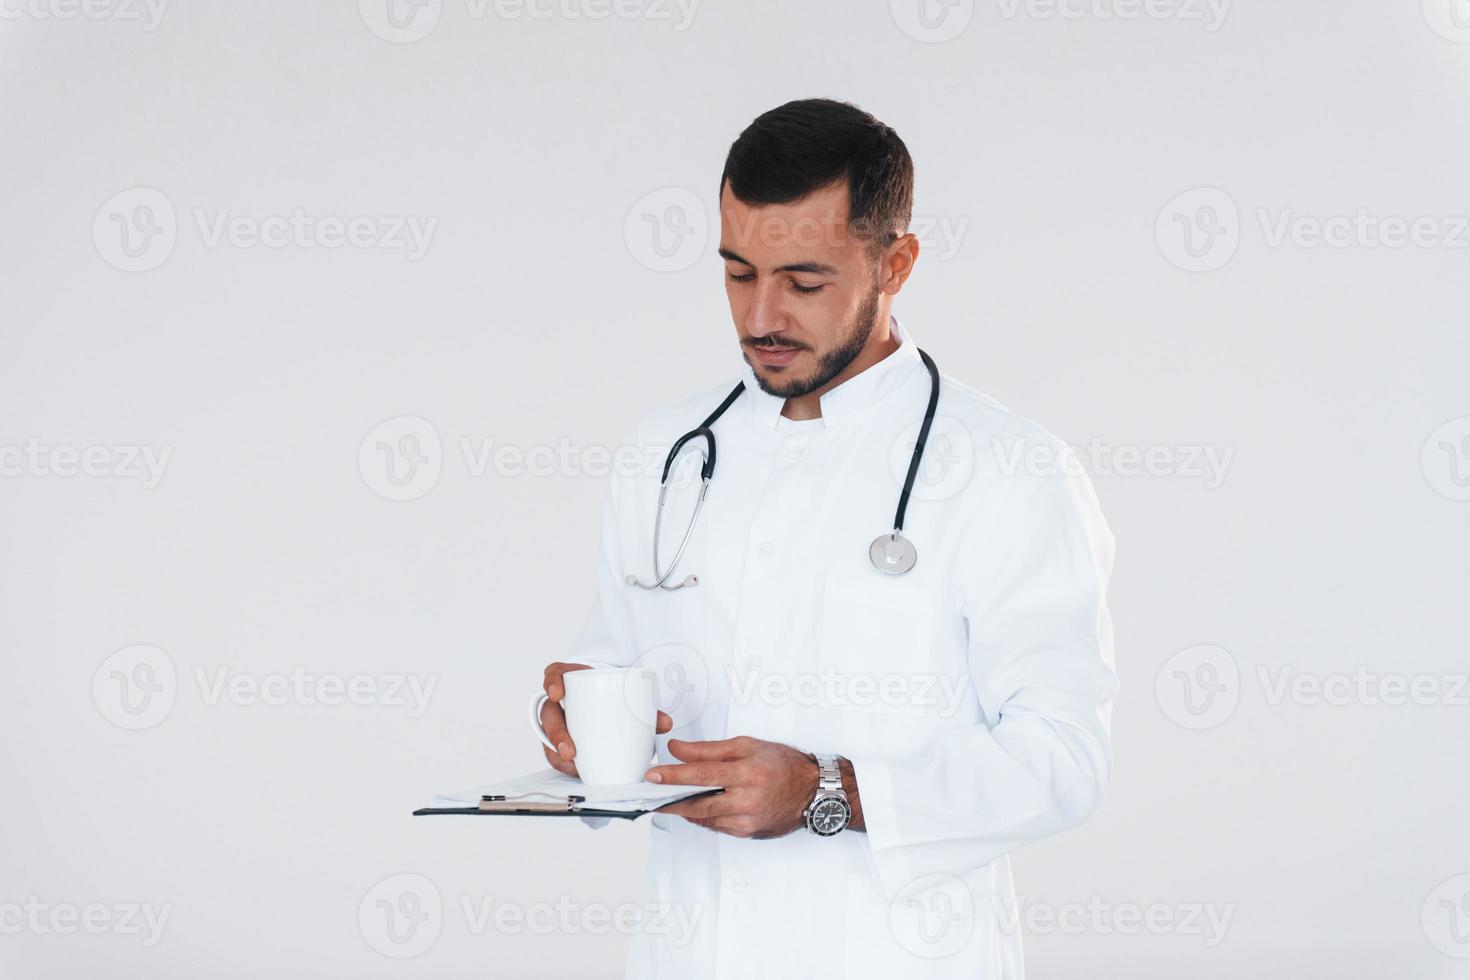 Medic in uniform. Young handsome man standing indoors against white background photo